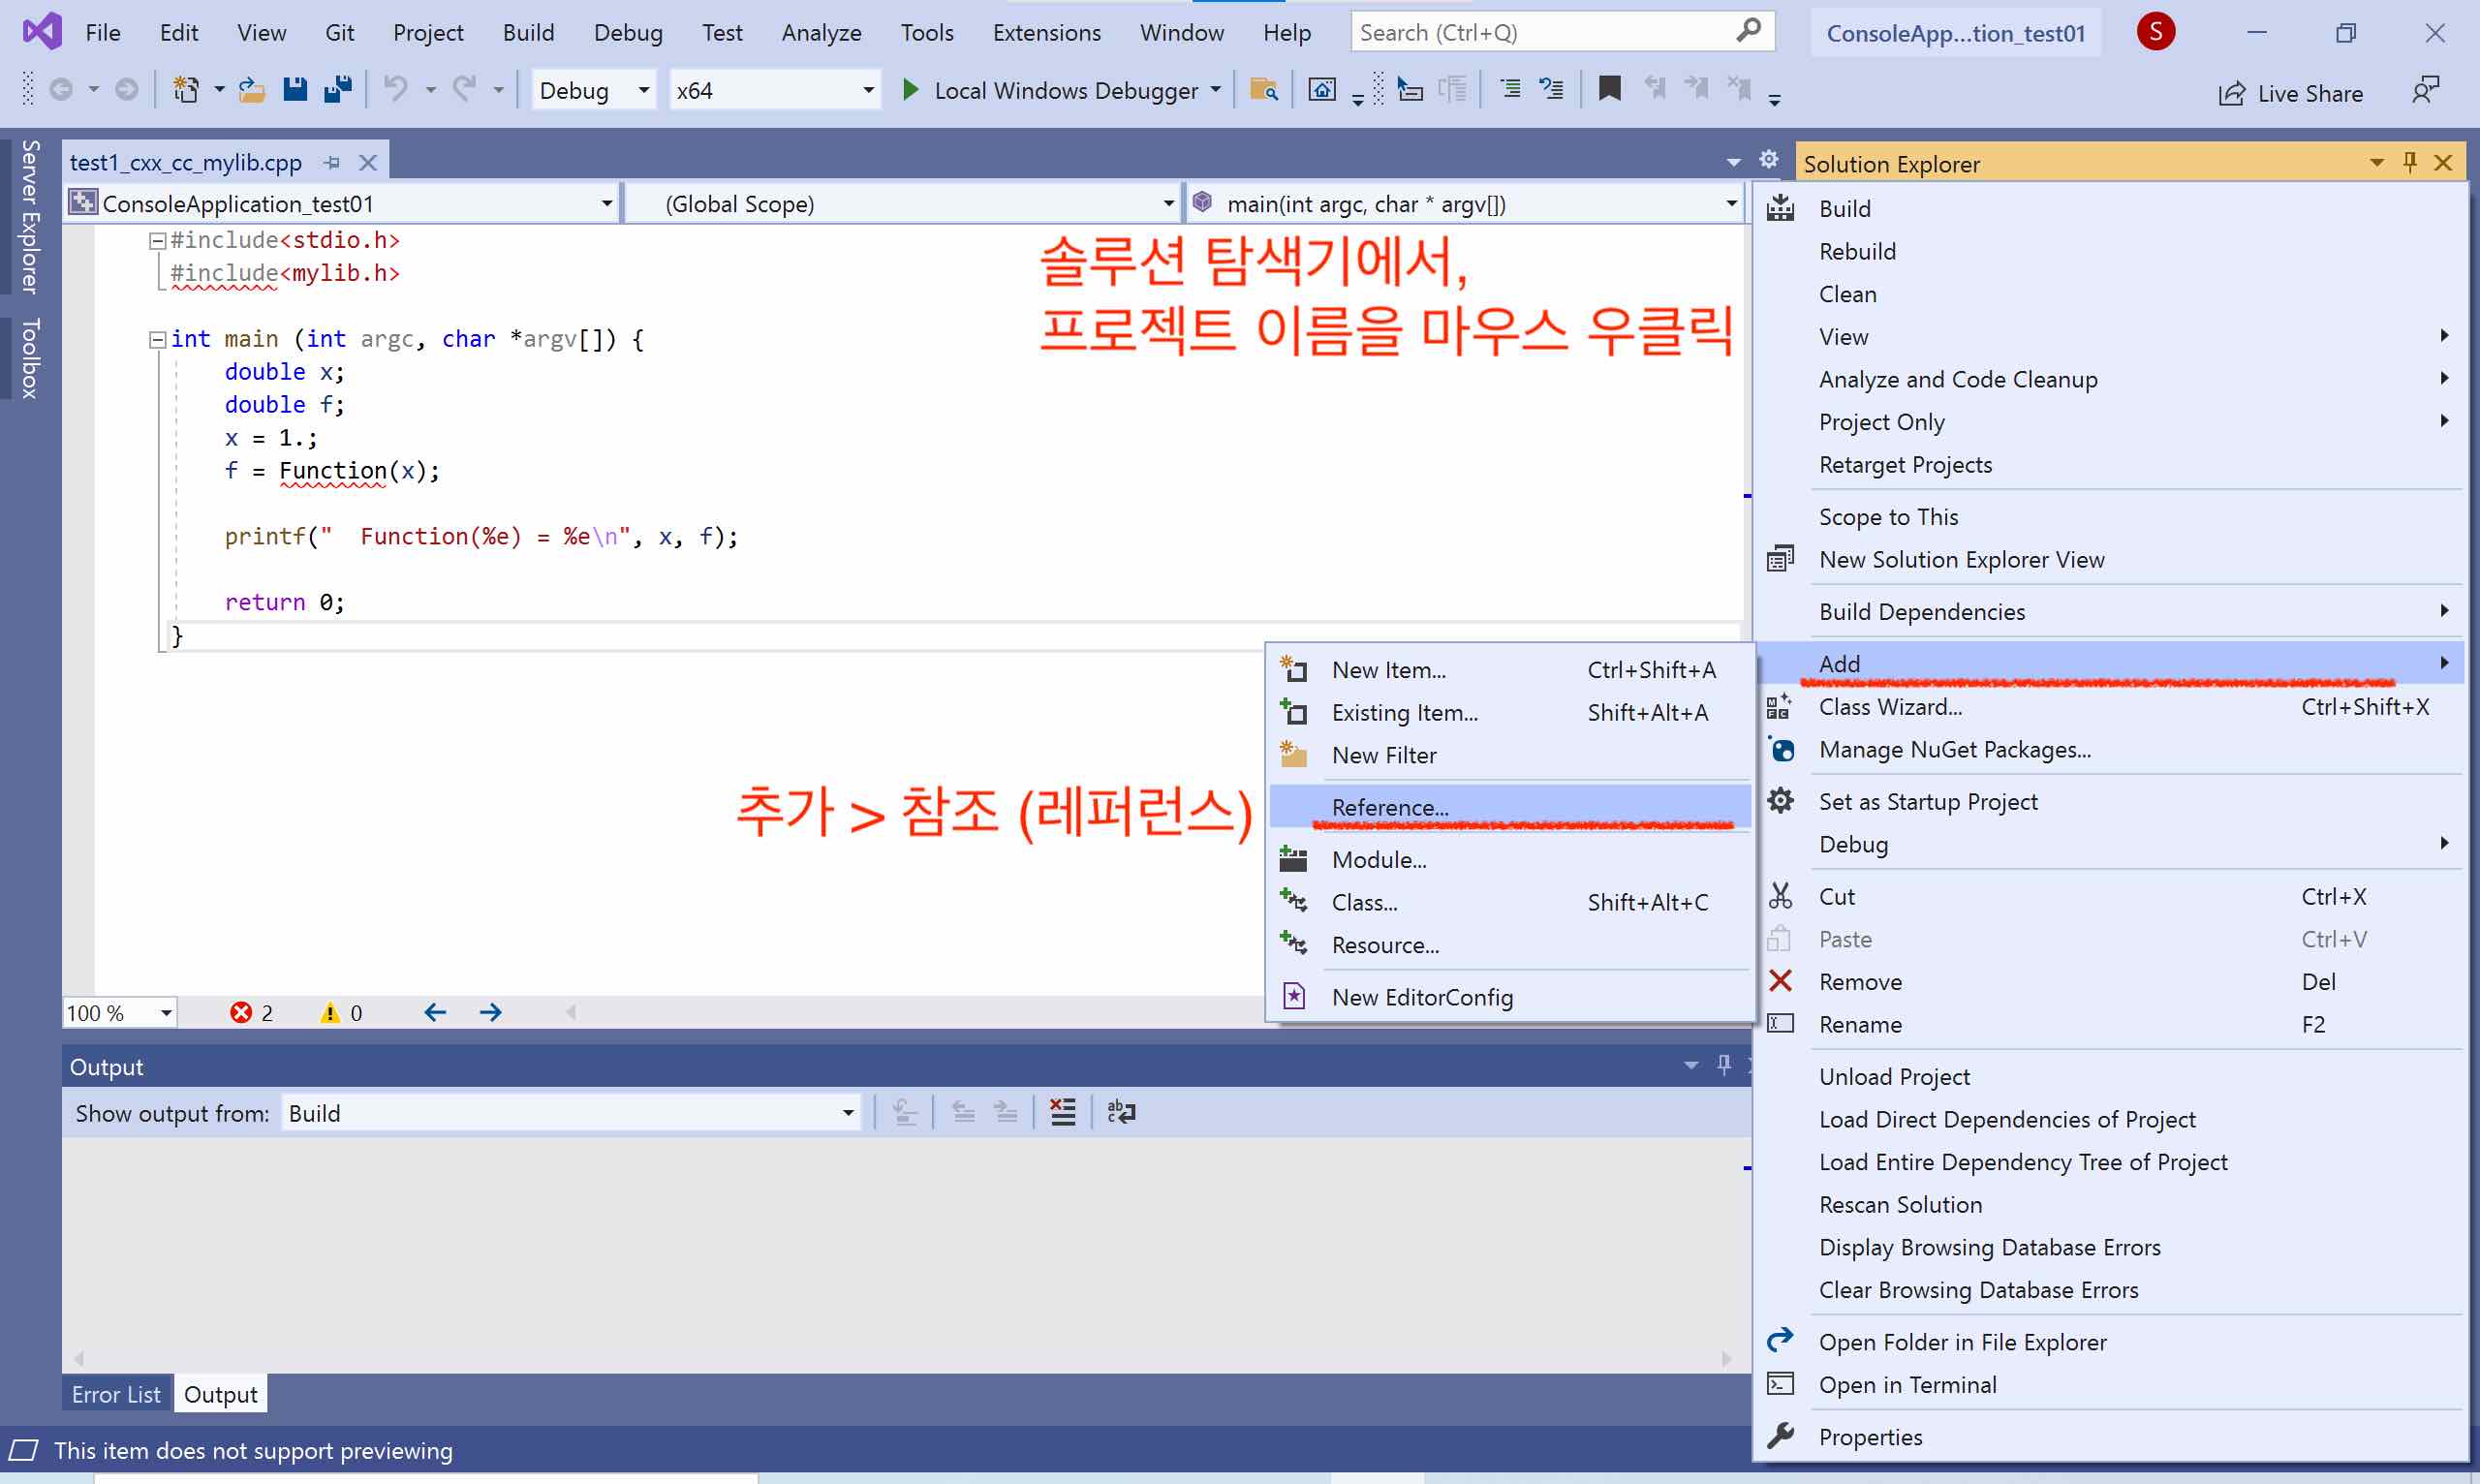 screenshot of Visual Studio Community 2019, showing an option to add refernce from the solution explorer